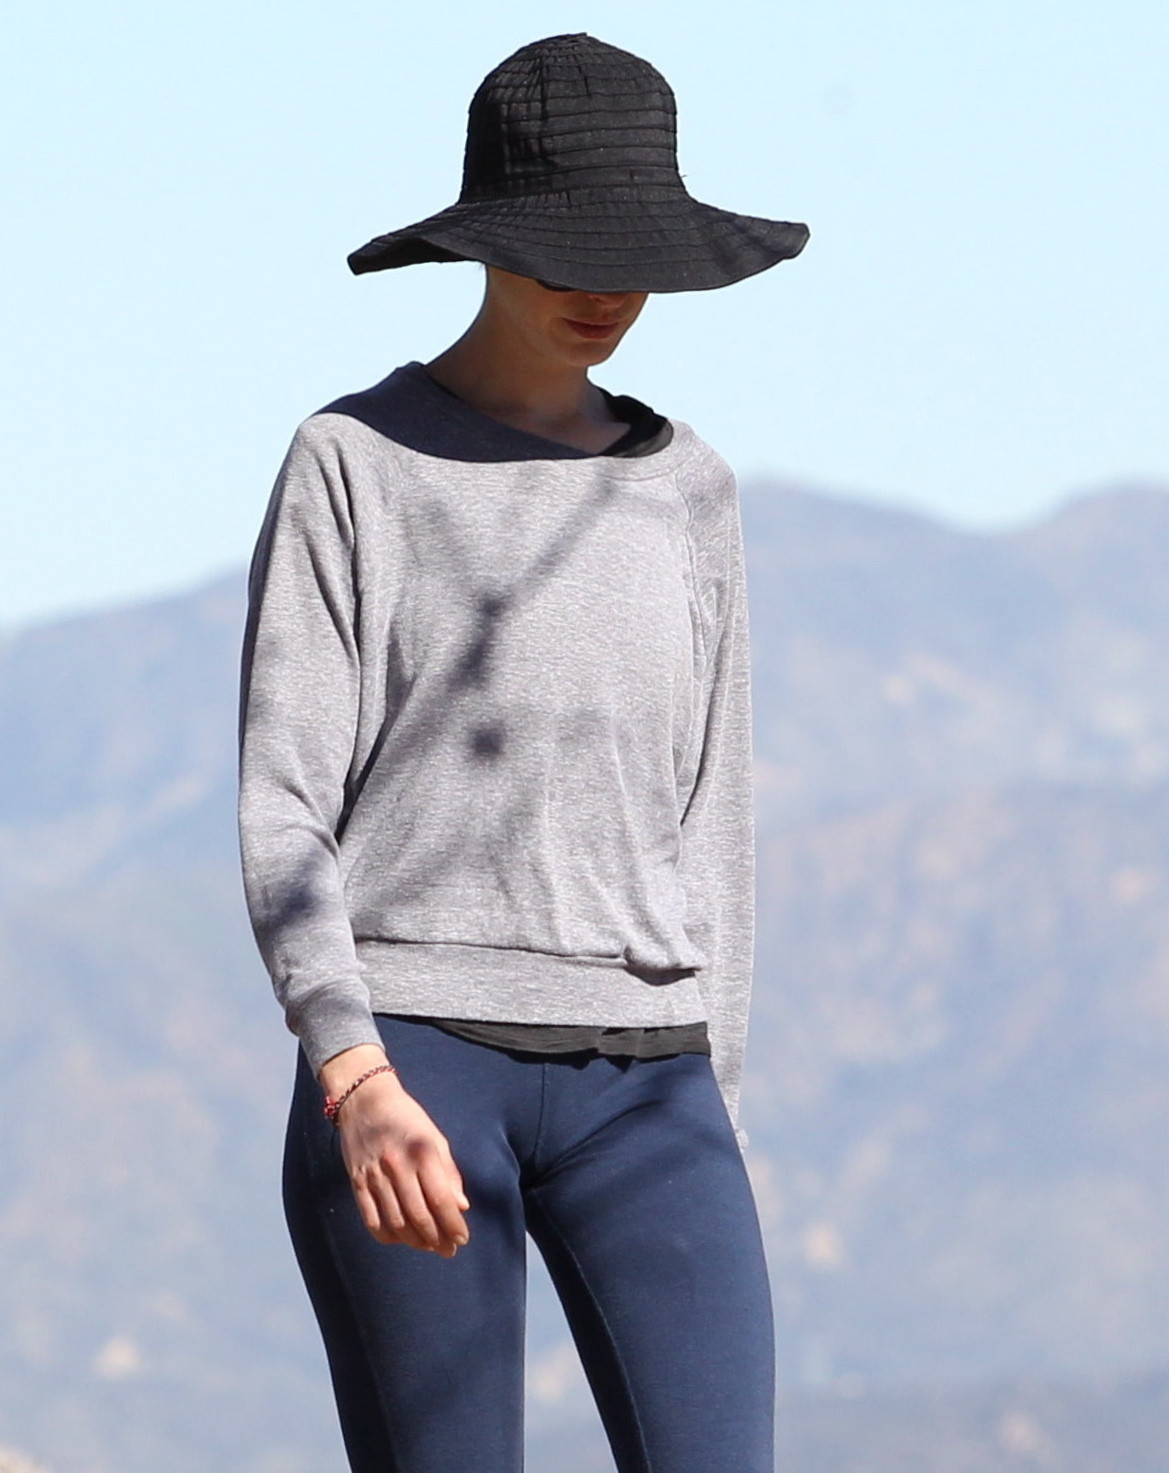 Anne Hathaway shows cameltoe  ass wearing tights for a hike in Hollywood Hills #75243125